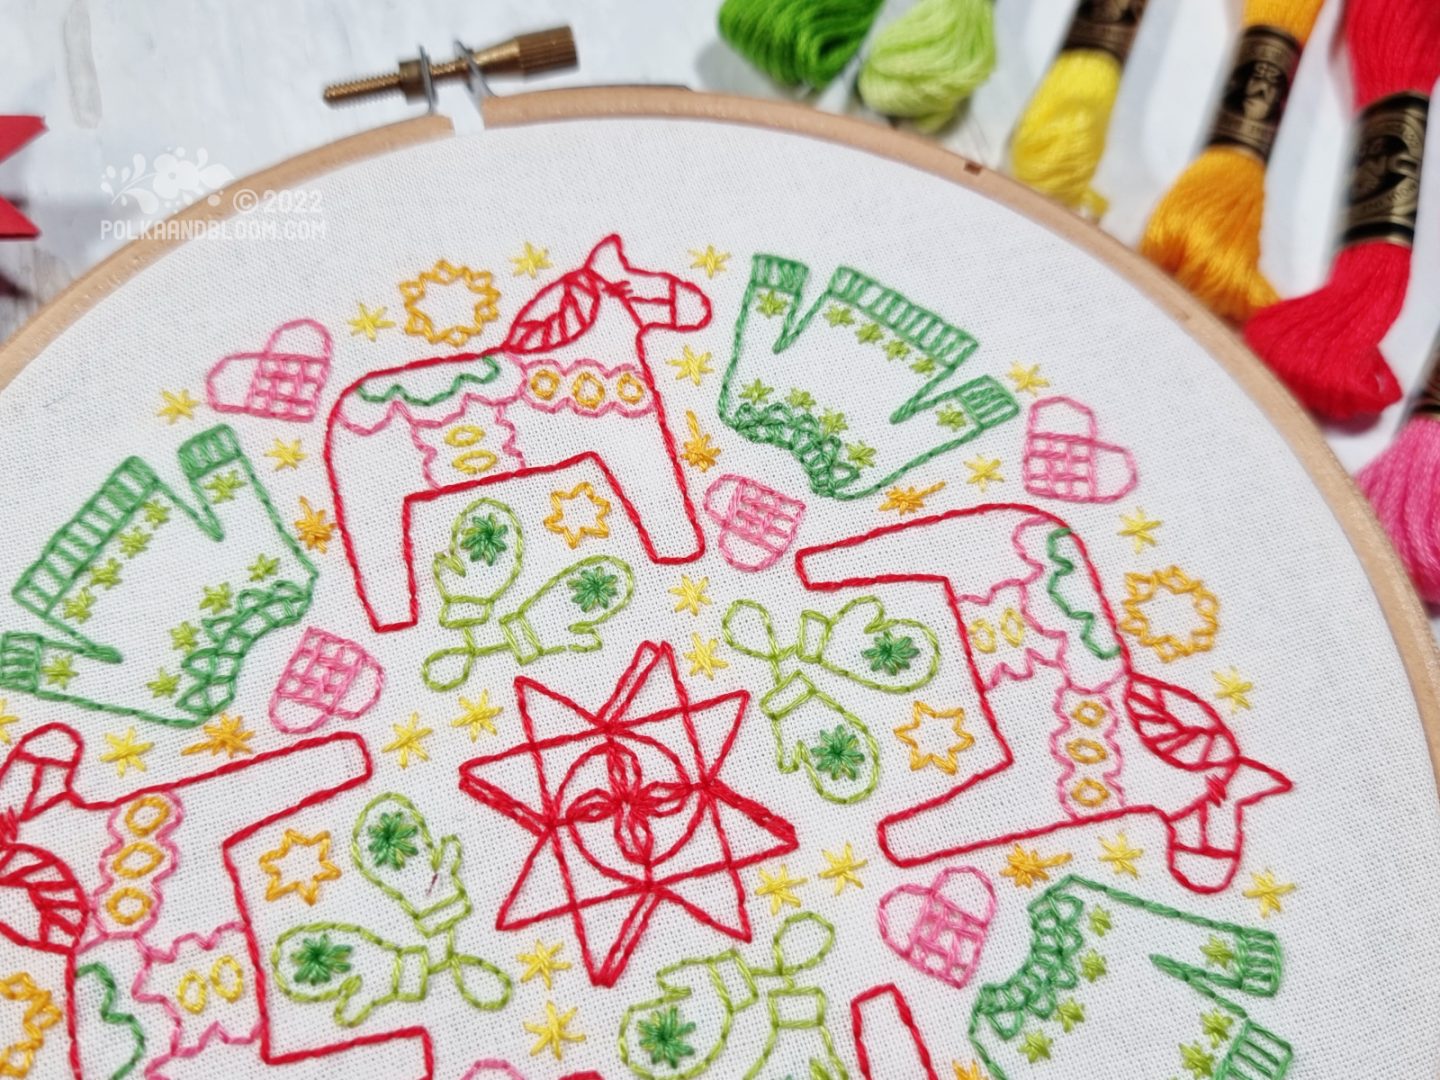 An embroidery hoop with white fabric is seen from above. On the fabric is embroidered a mandala inspired design with stars, sweaters, mittens, hears and dala horses.